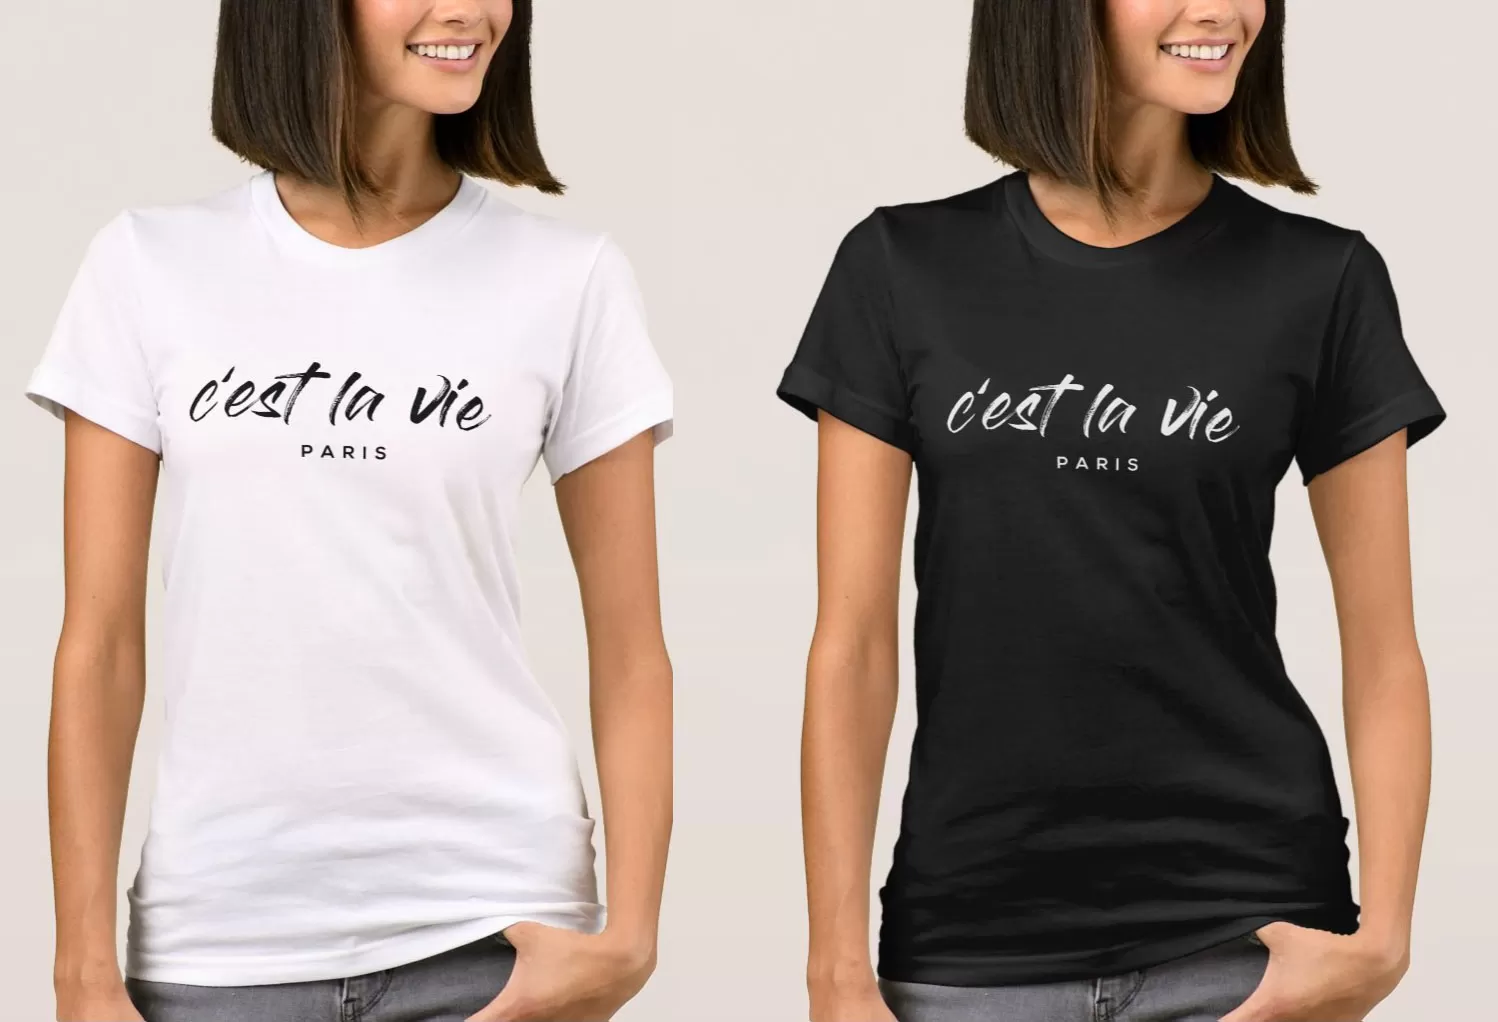 Gifts for language learners and travellers - C'est La Vie T-Shirt